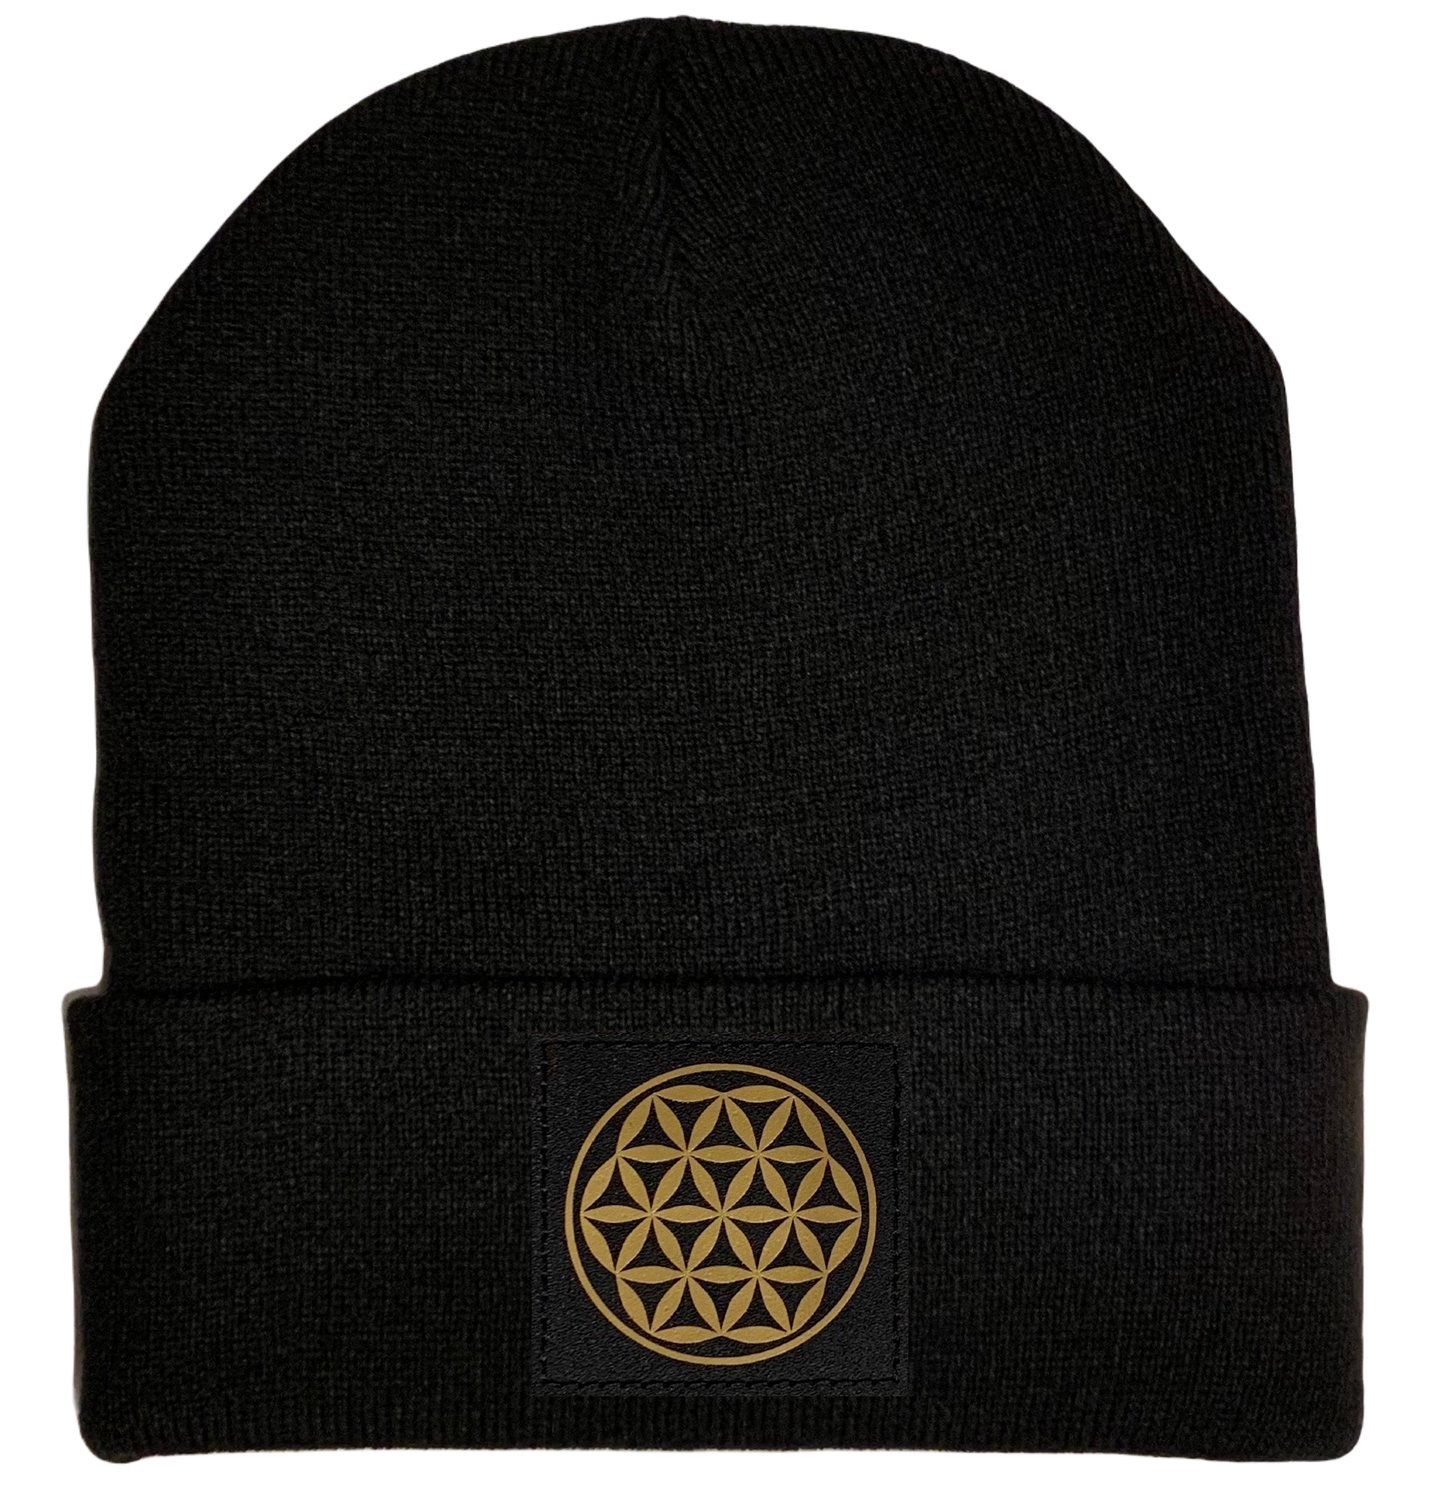 Beanie - Black cuffed w, Black and Gold Hand Made Flower of Life Vegan Leather patch over your Third Eye buddha gear